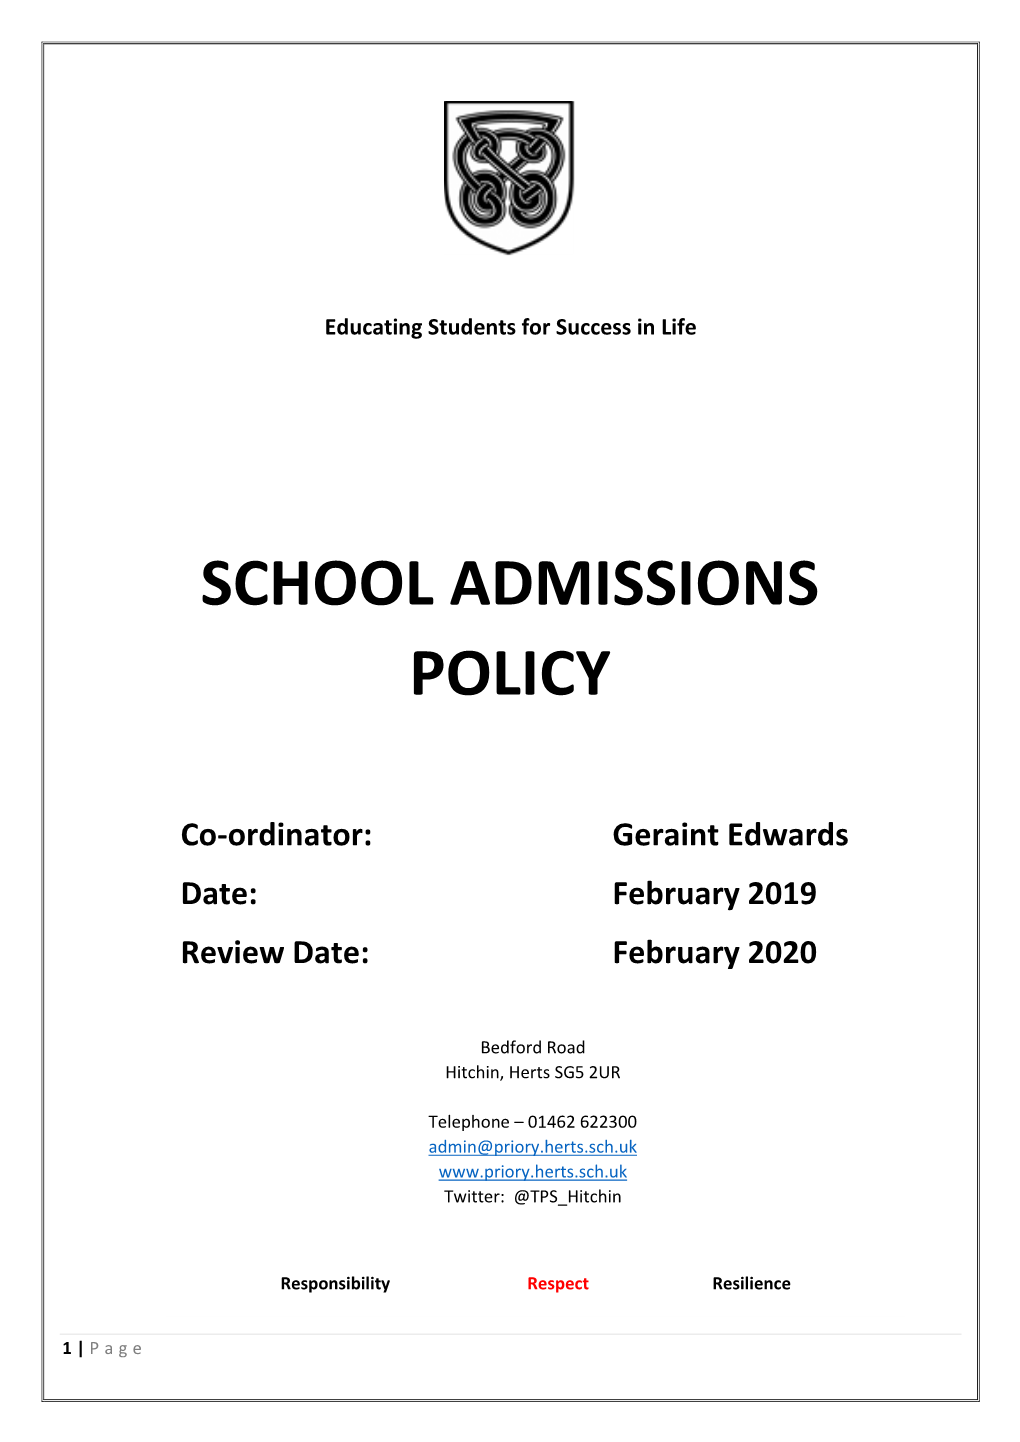 School Admissions Policy